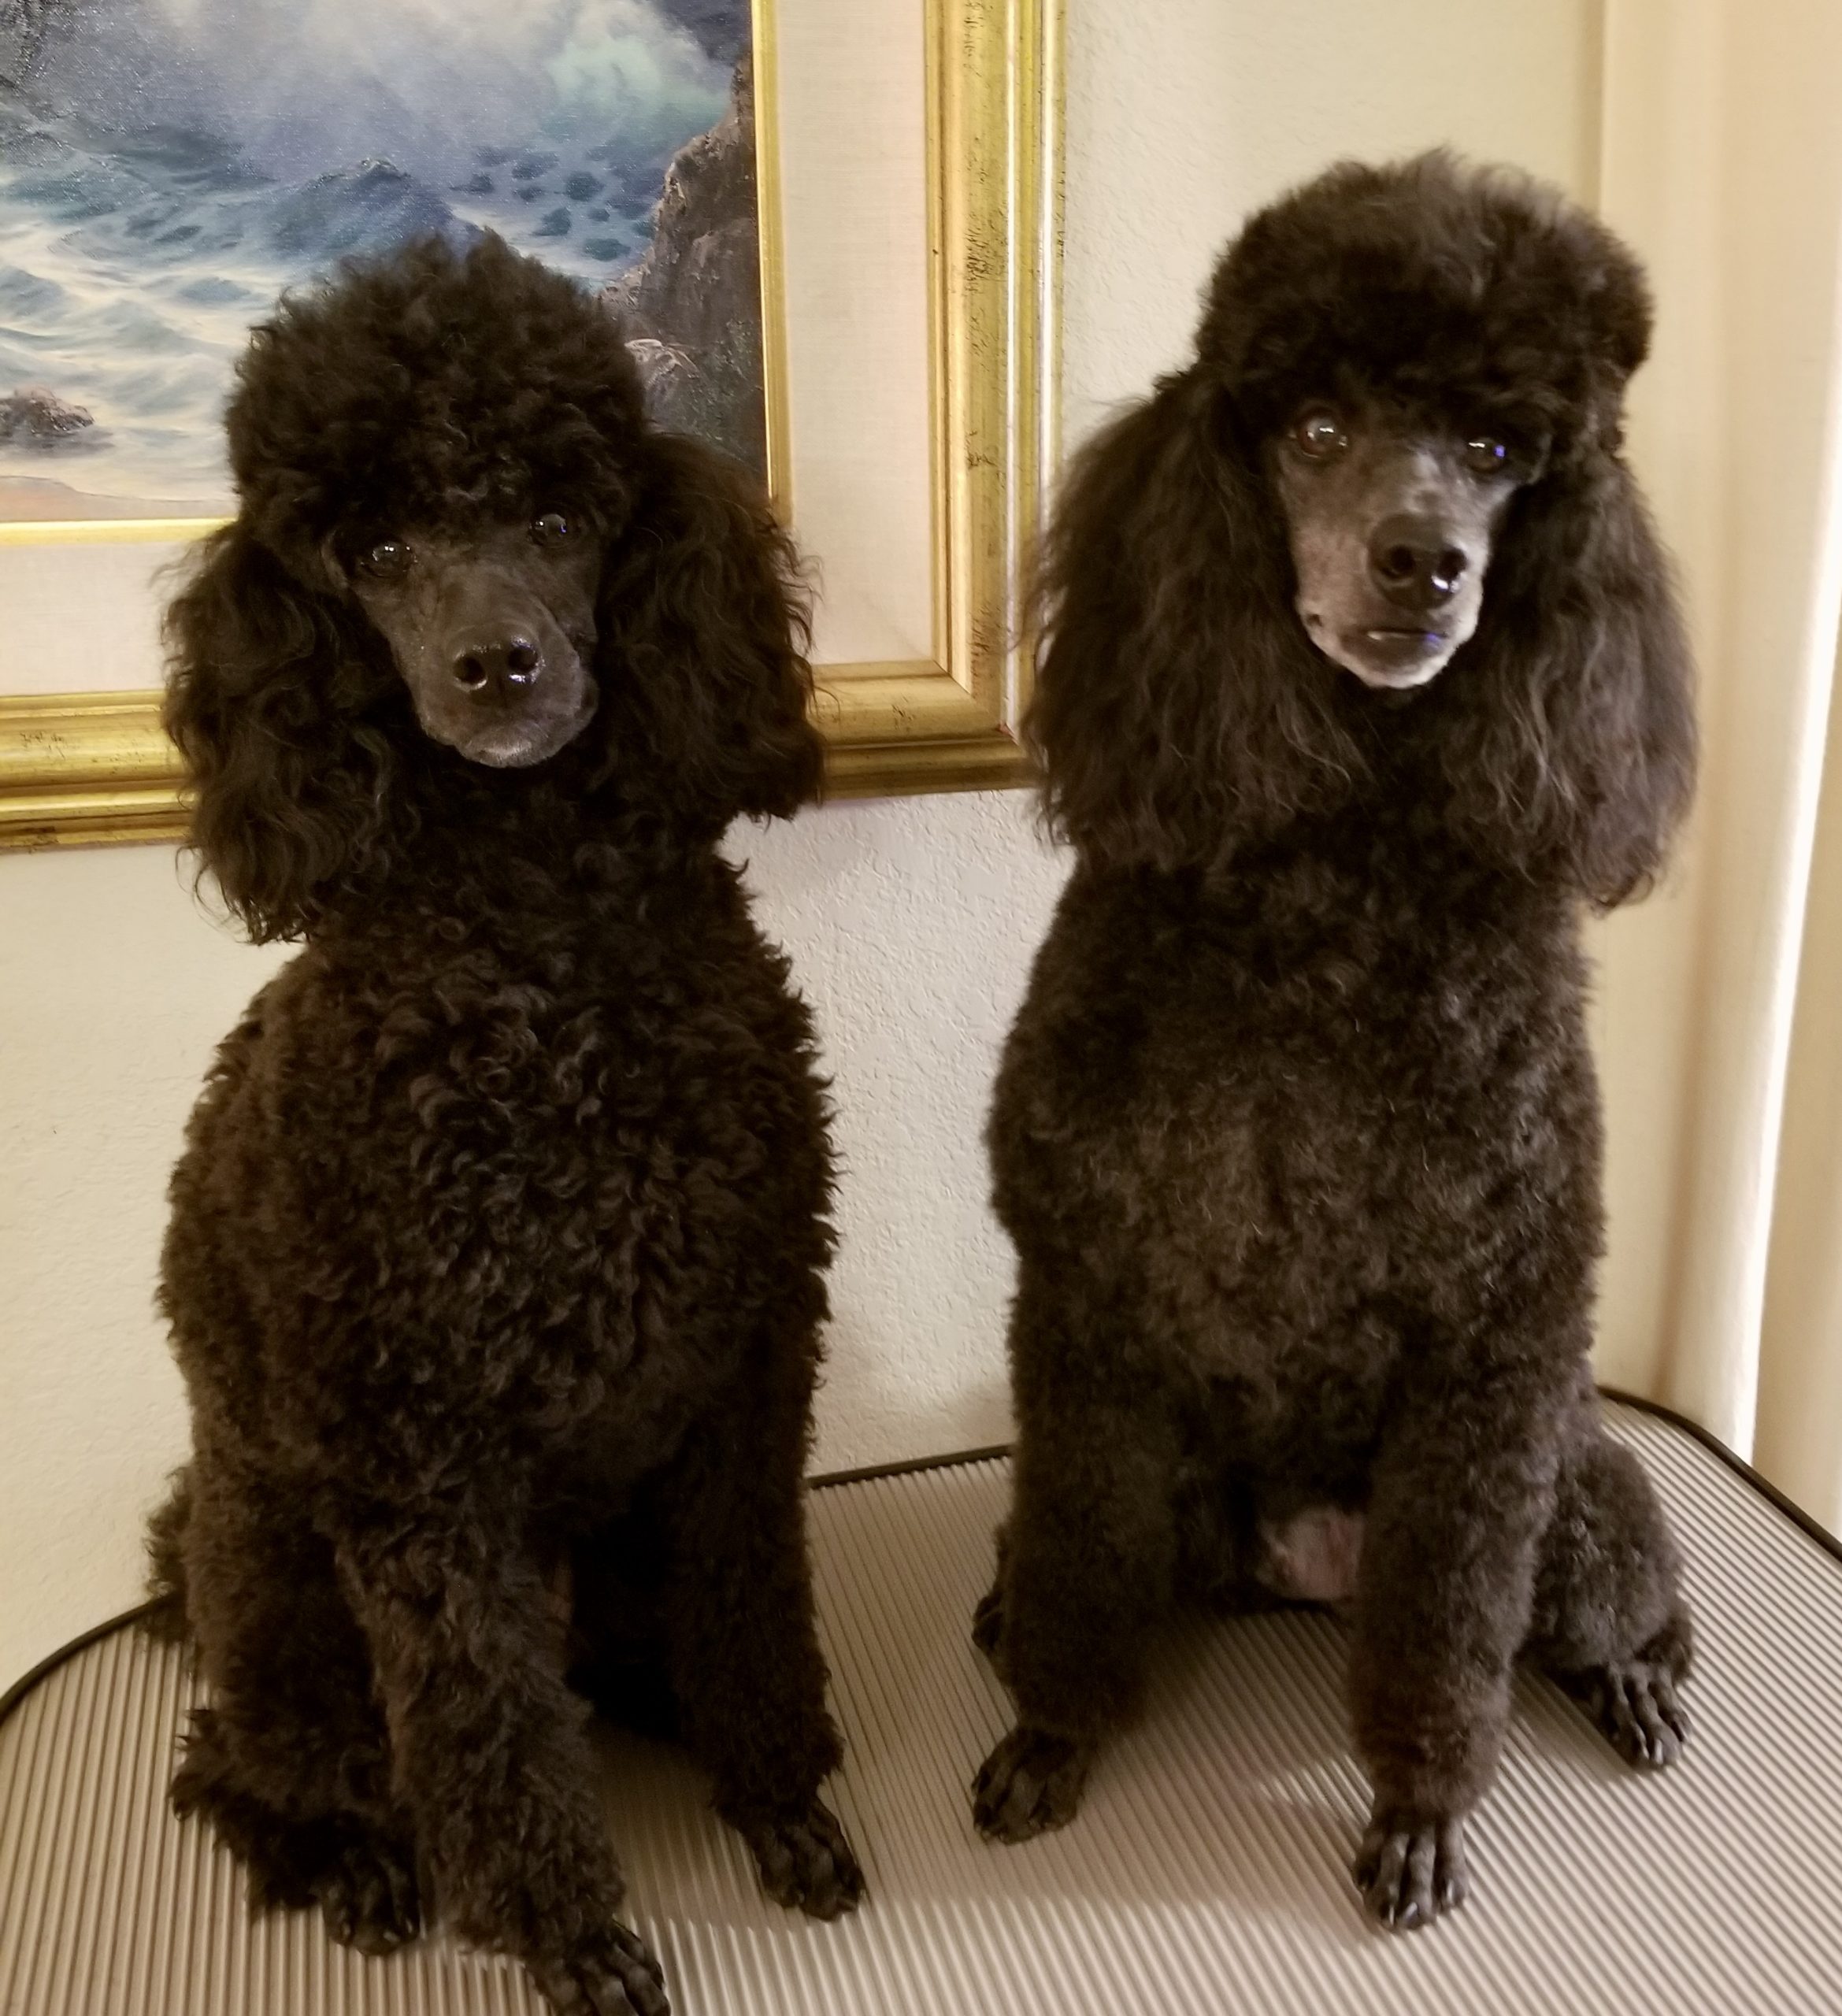 2 Black mini-Poodles sitting next to each other